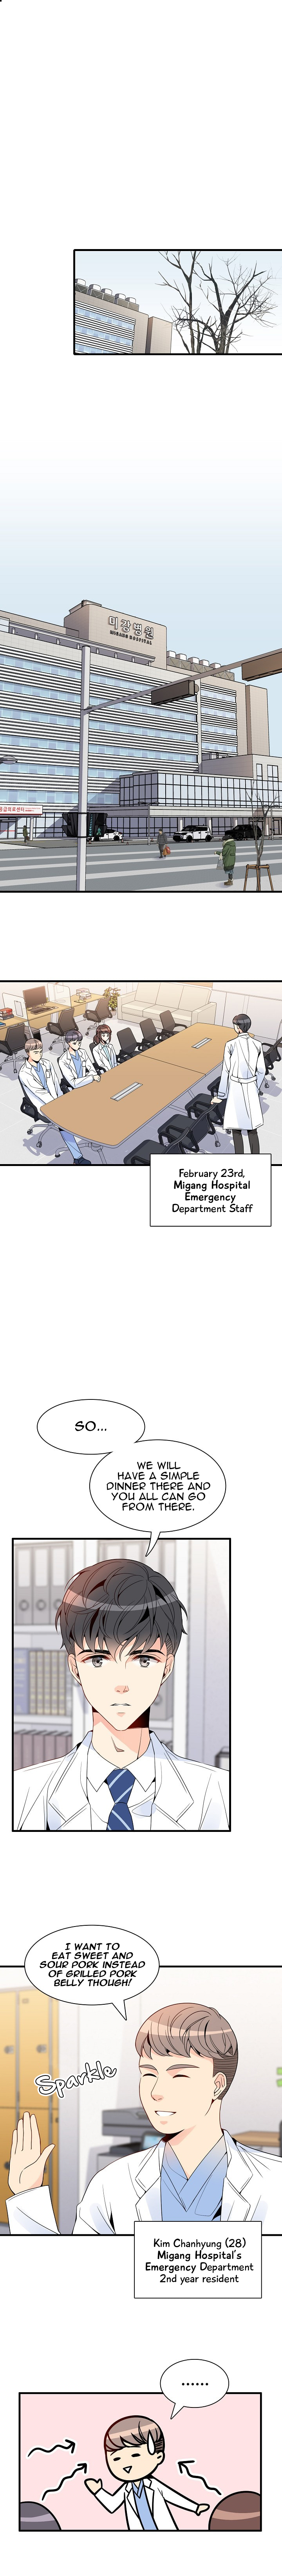 Emergency! How To Deal With Love Ch. 6